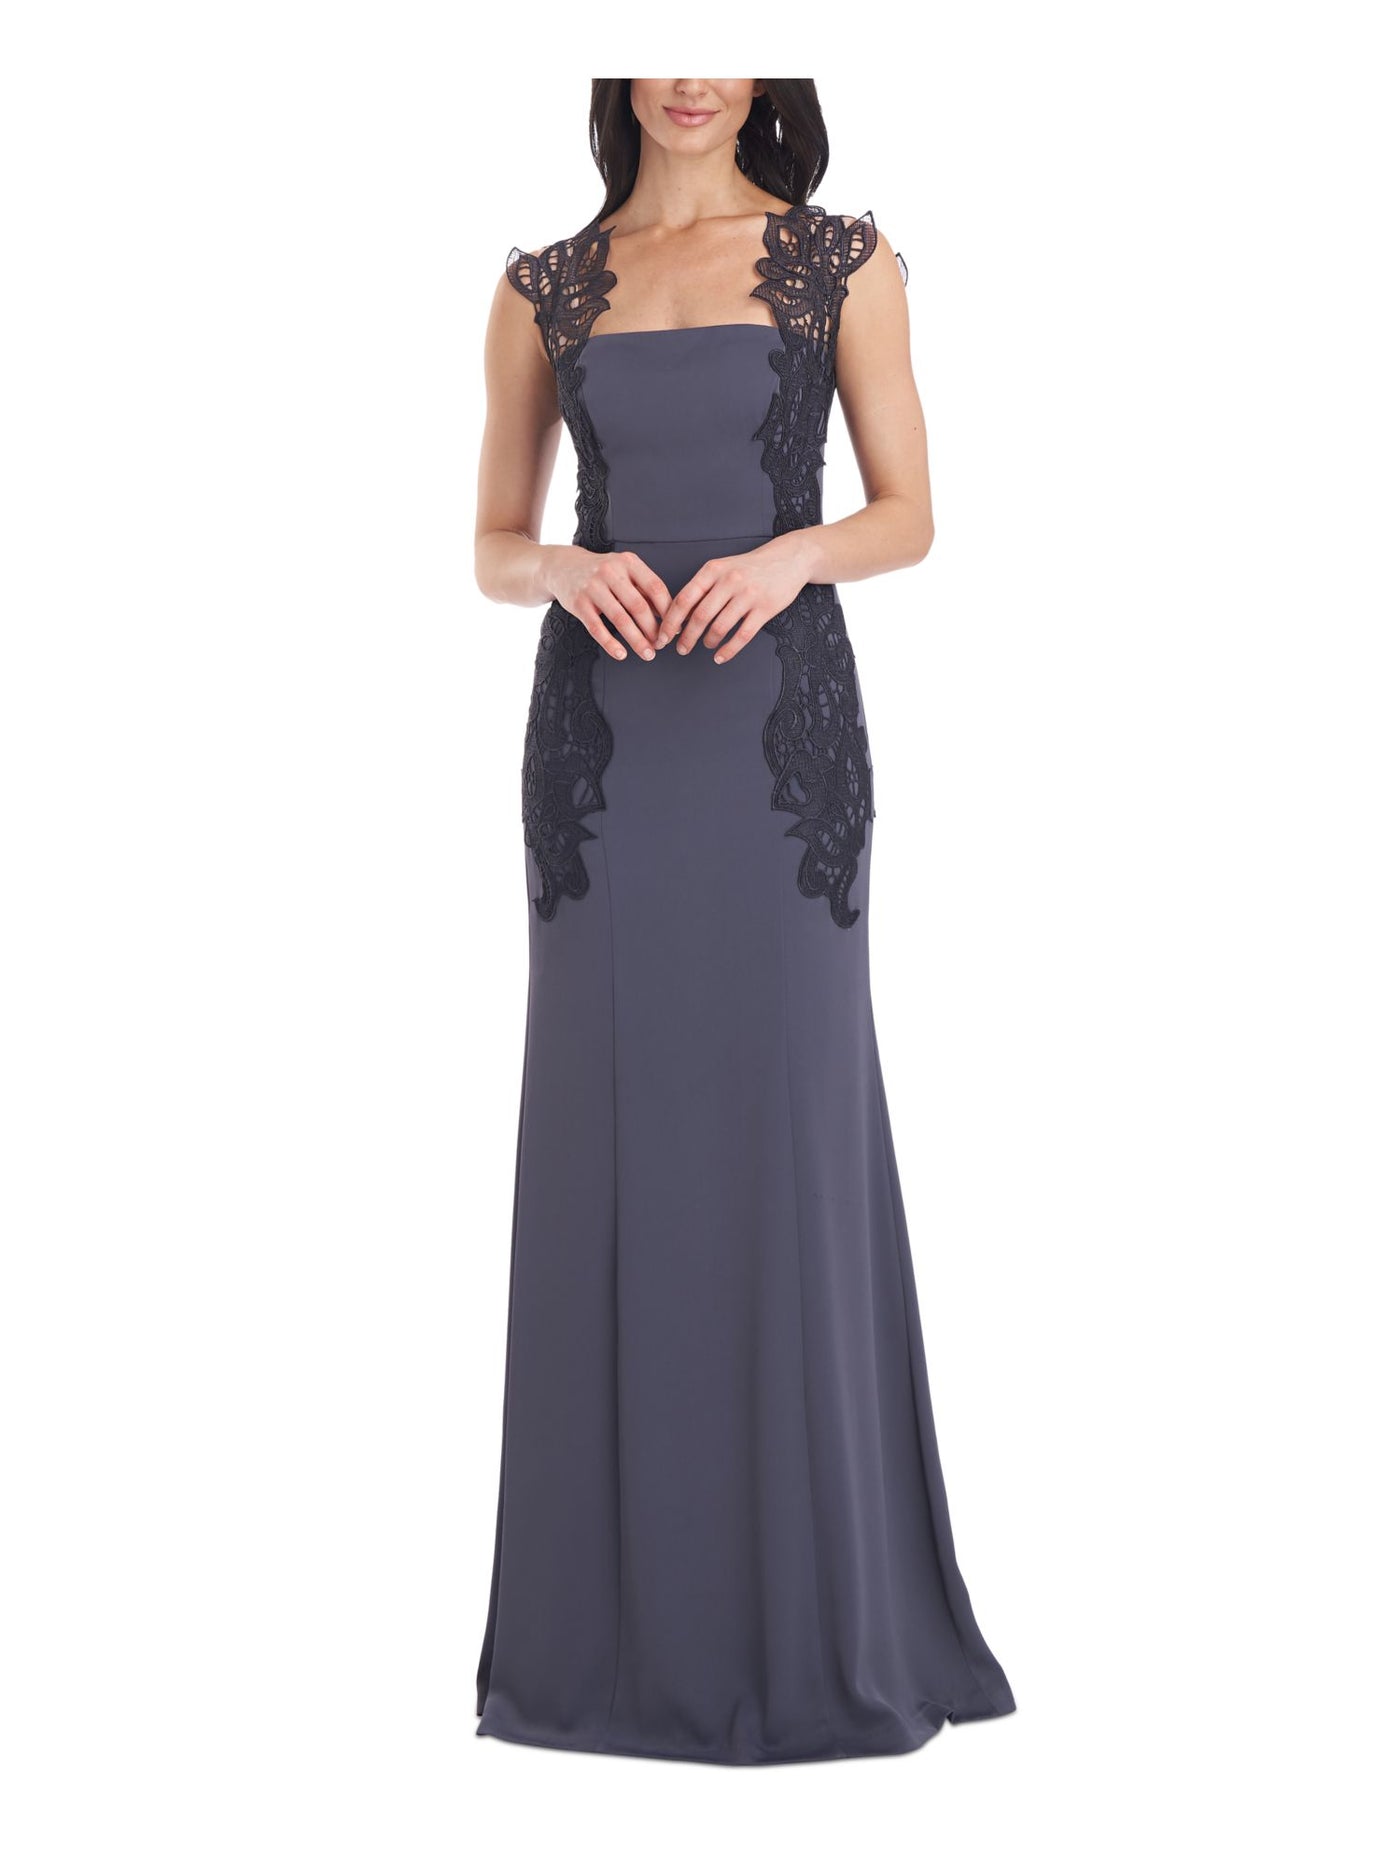 JS COLLECTION Womens Zippered Lace Lined Satin Sleeveless Square Neck Full-Length Evening Mermaid Dress